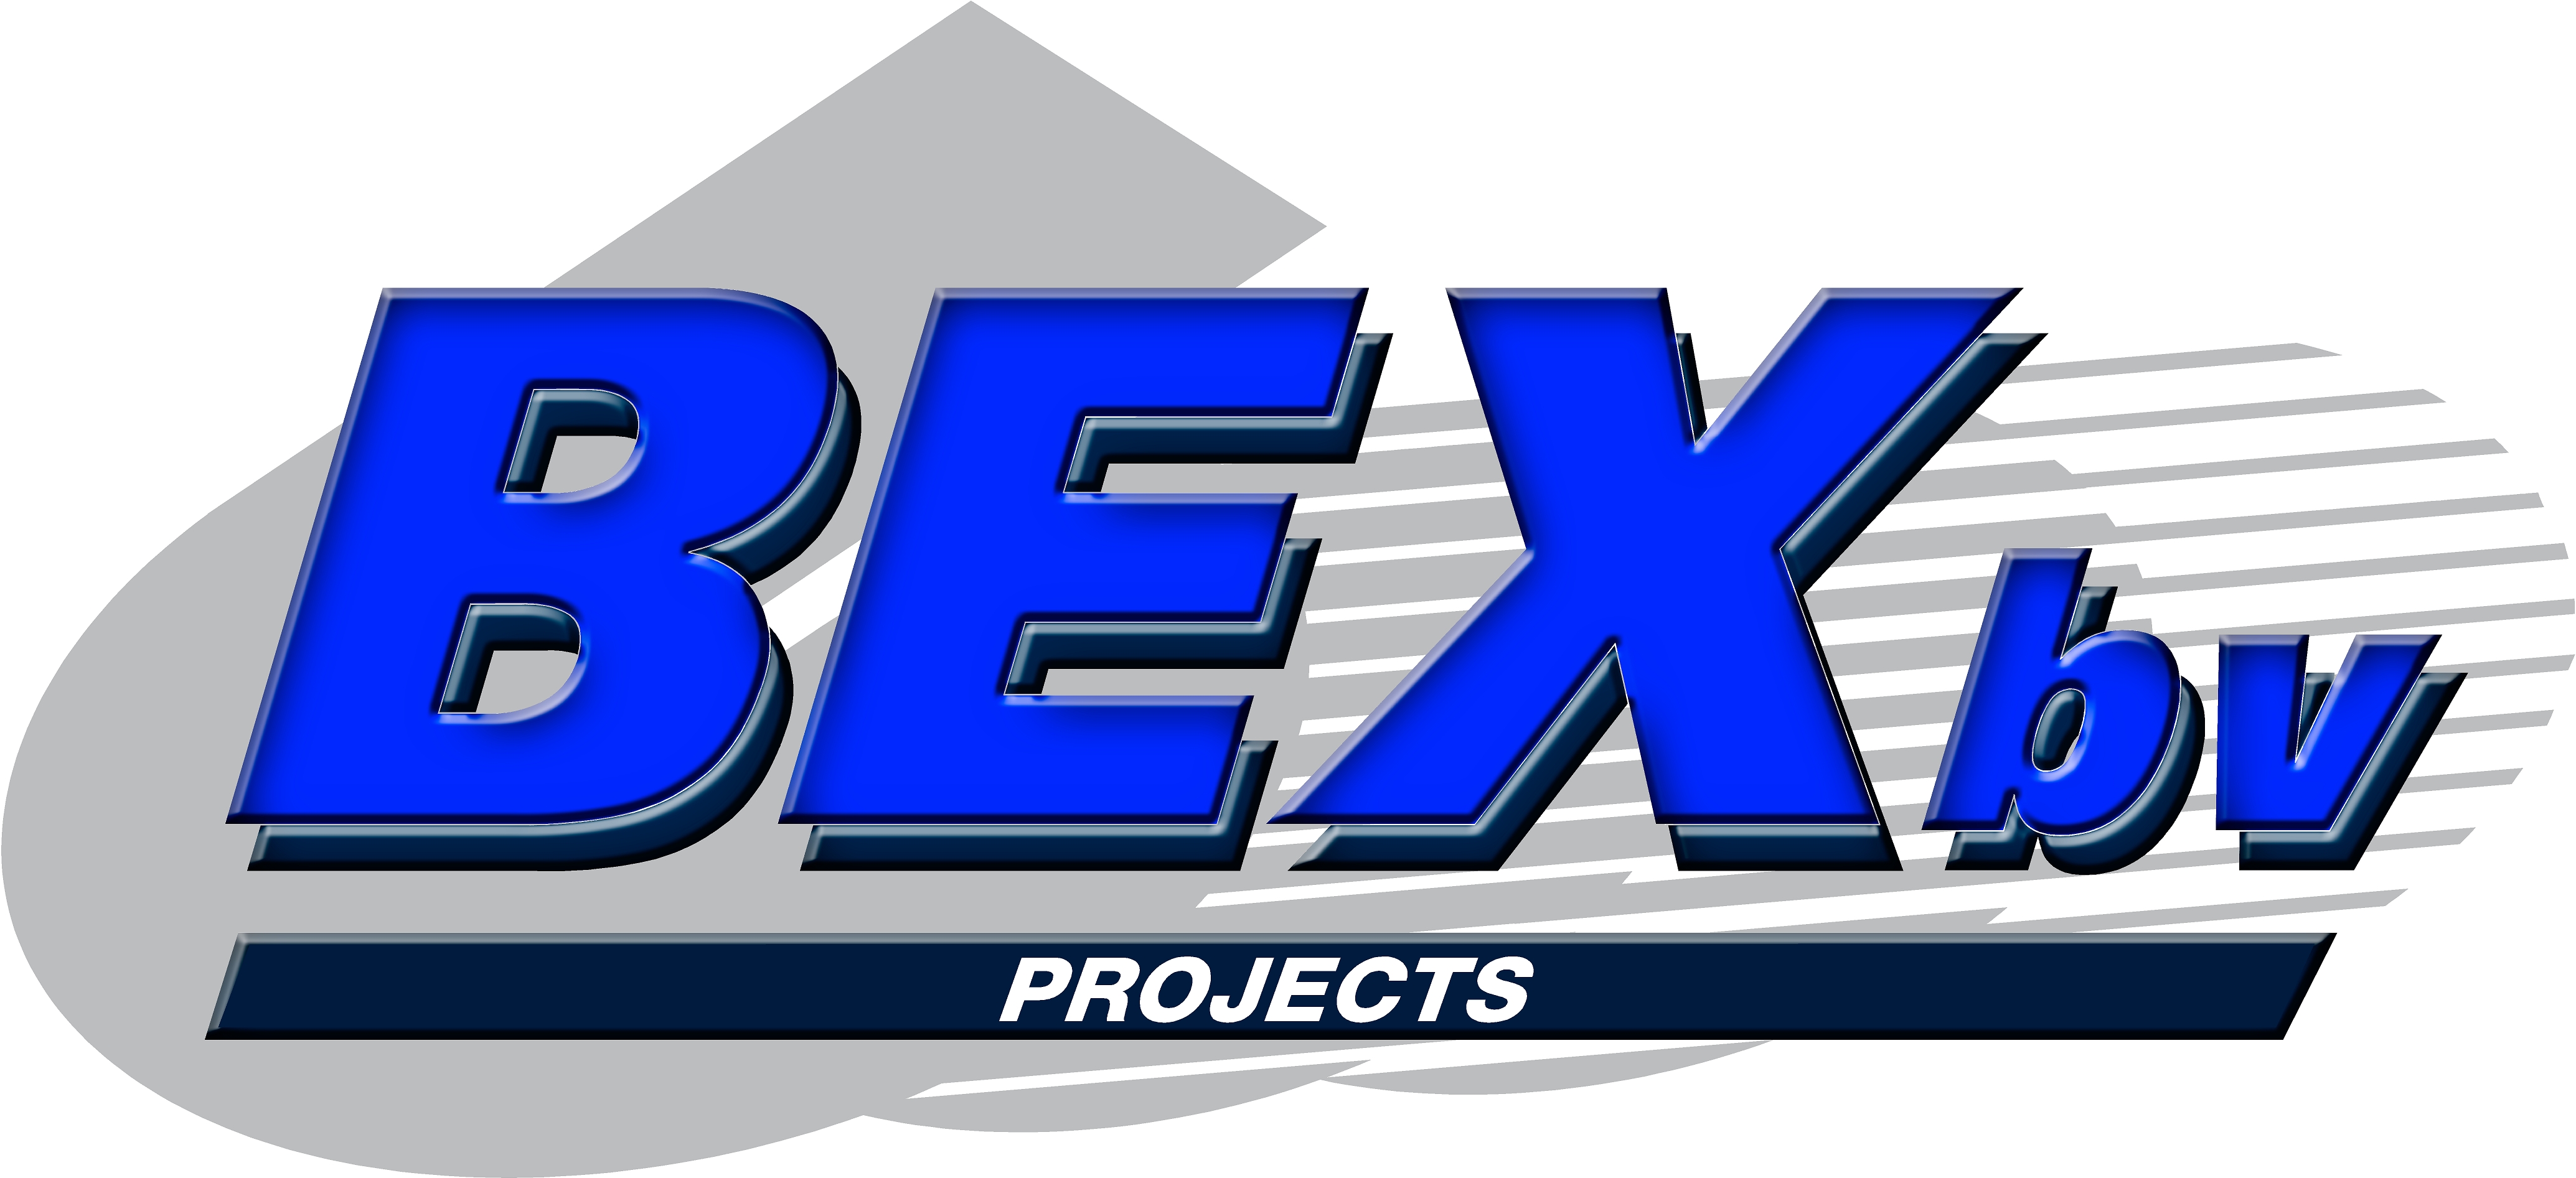 Bex projects bv